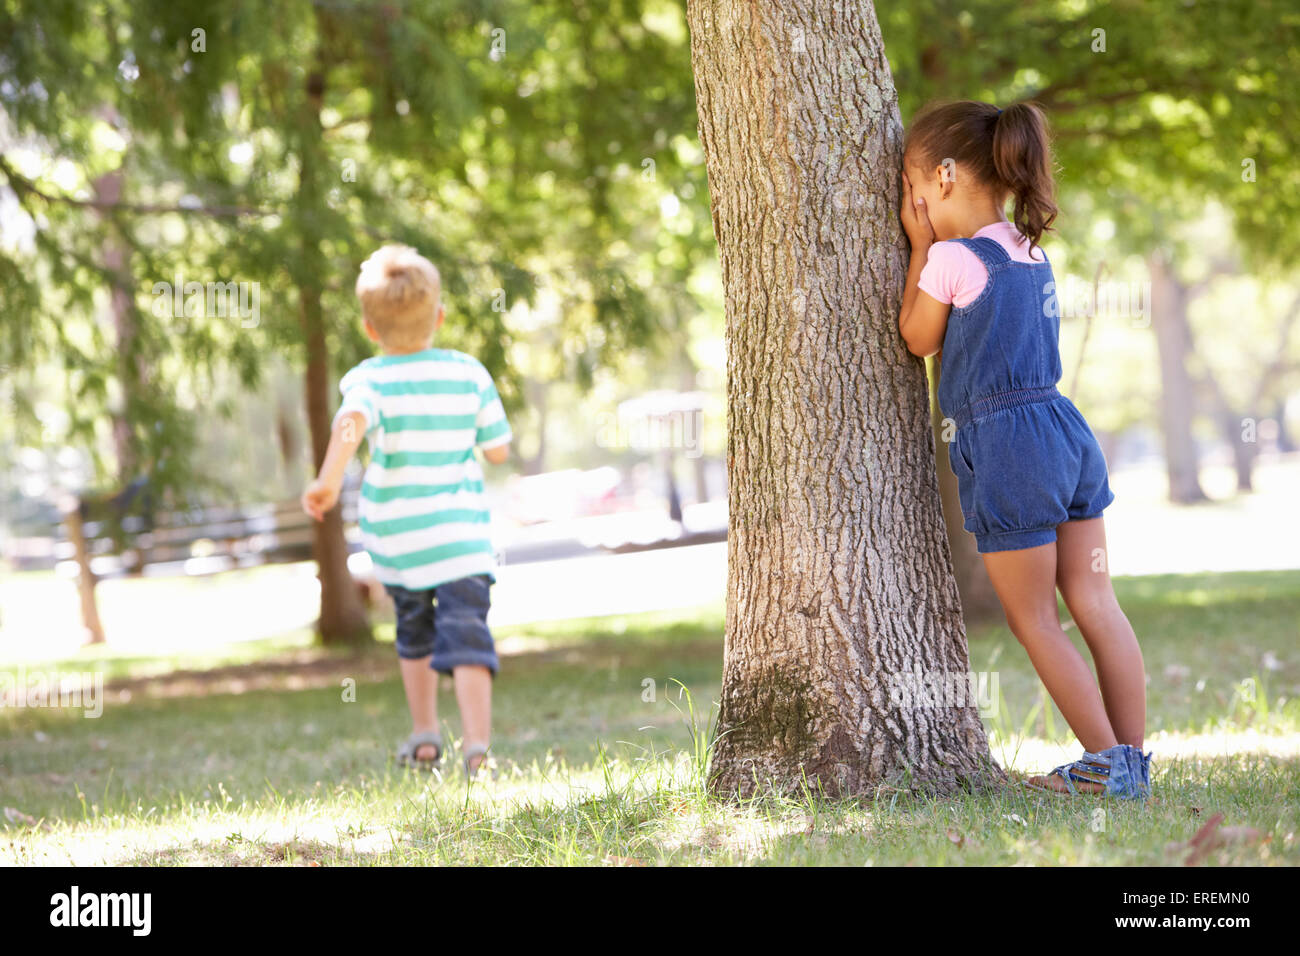 Two Children Playing Hide And Seek In Park Stock Photo